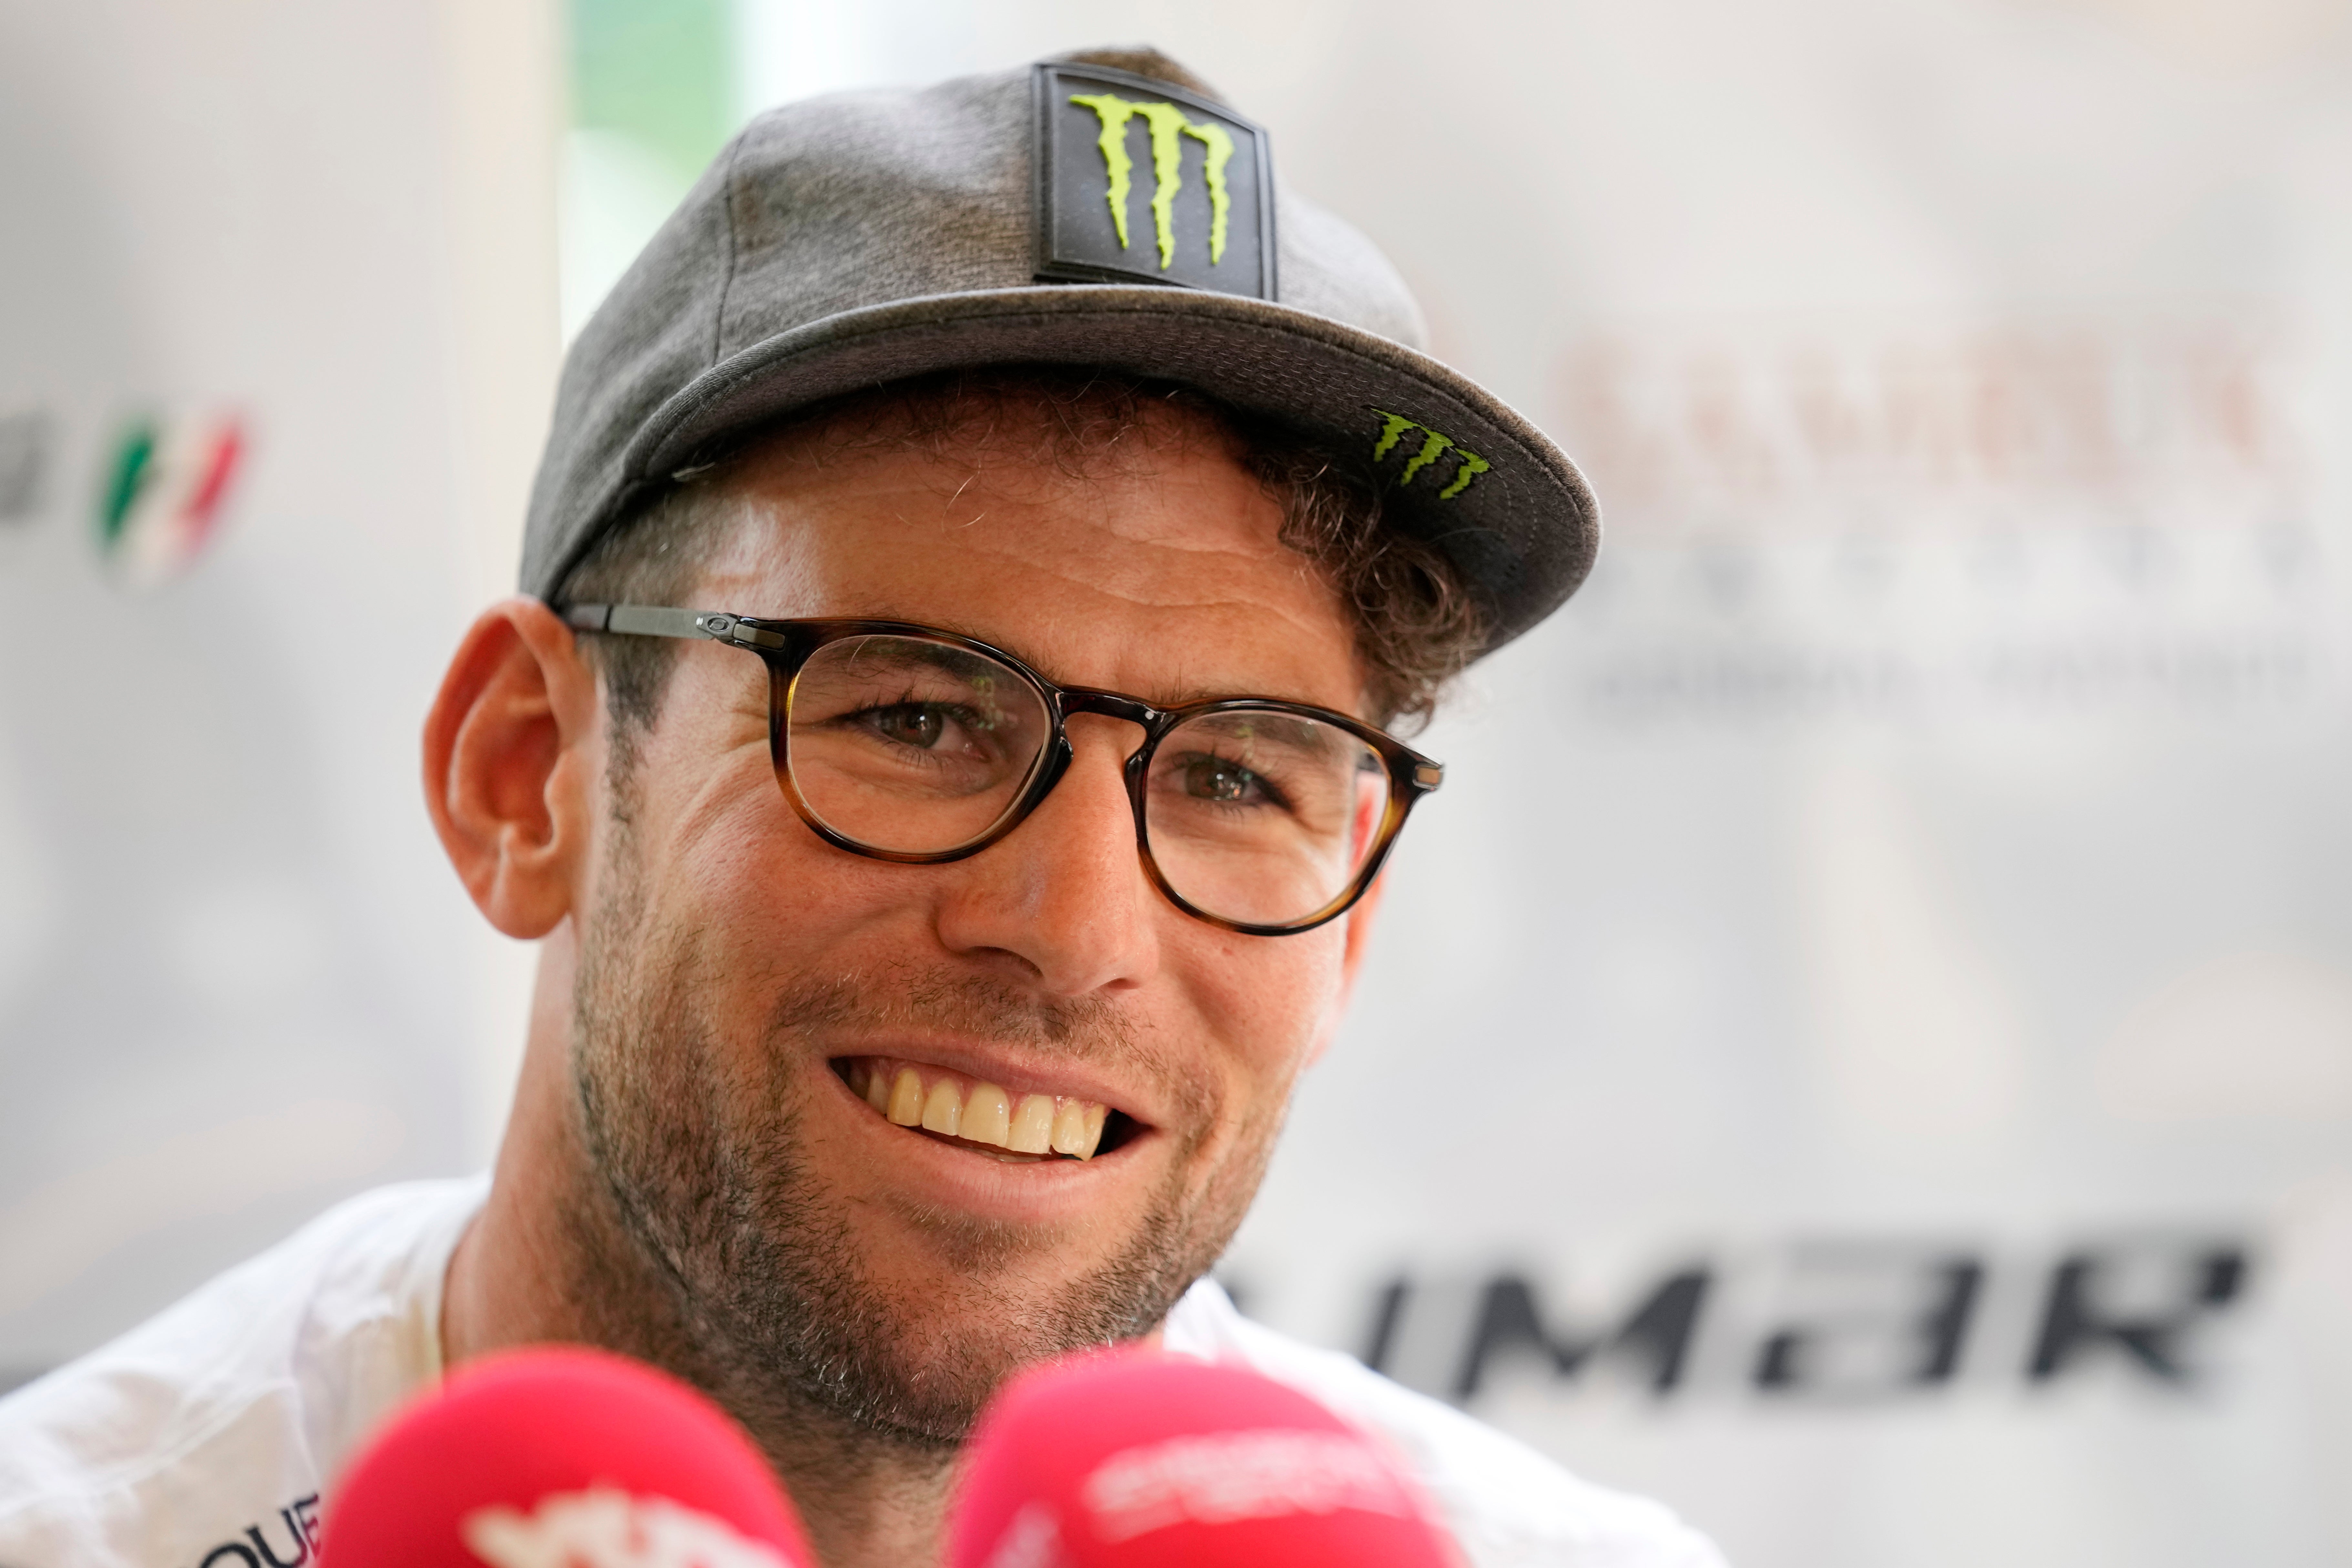 Mark Cavendish announced his plan to retire at the end of the season